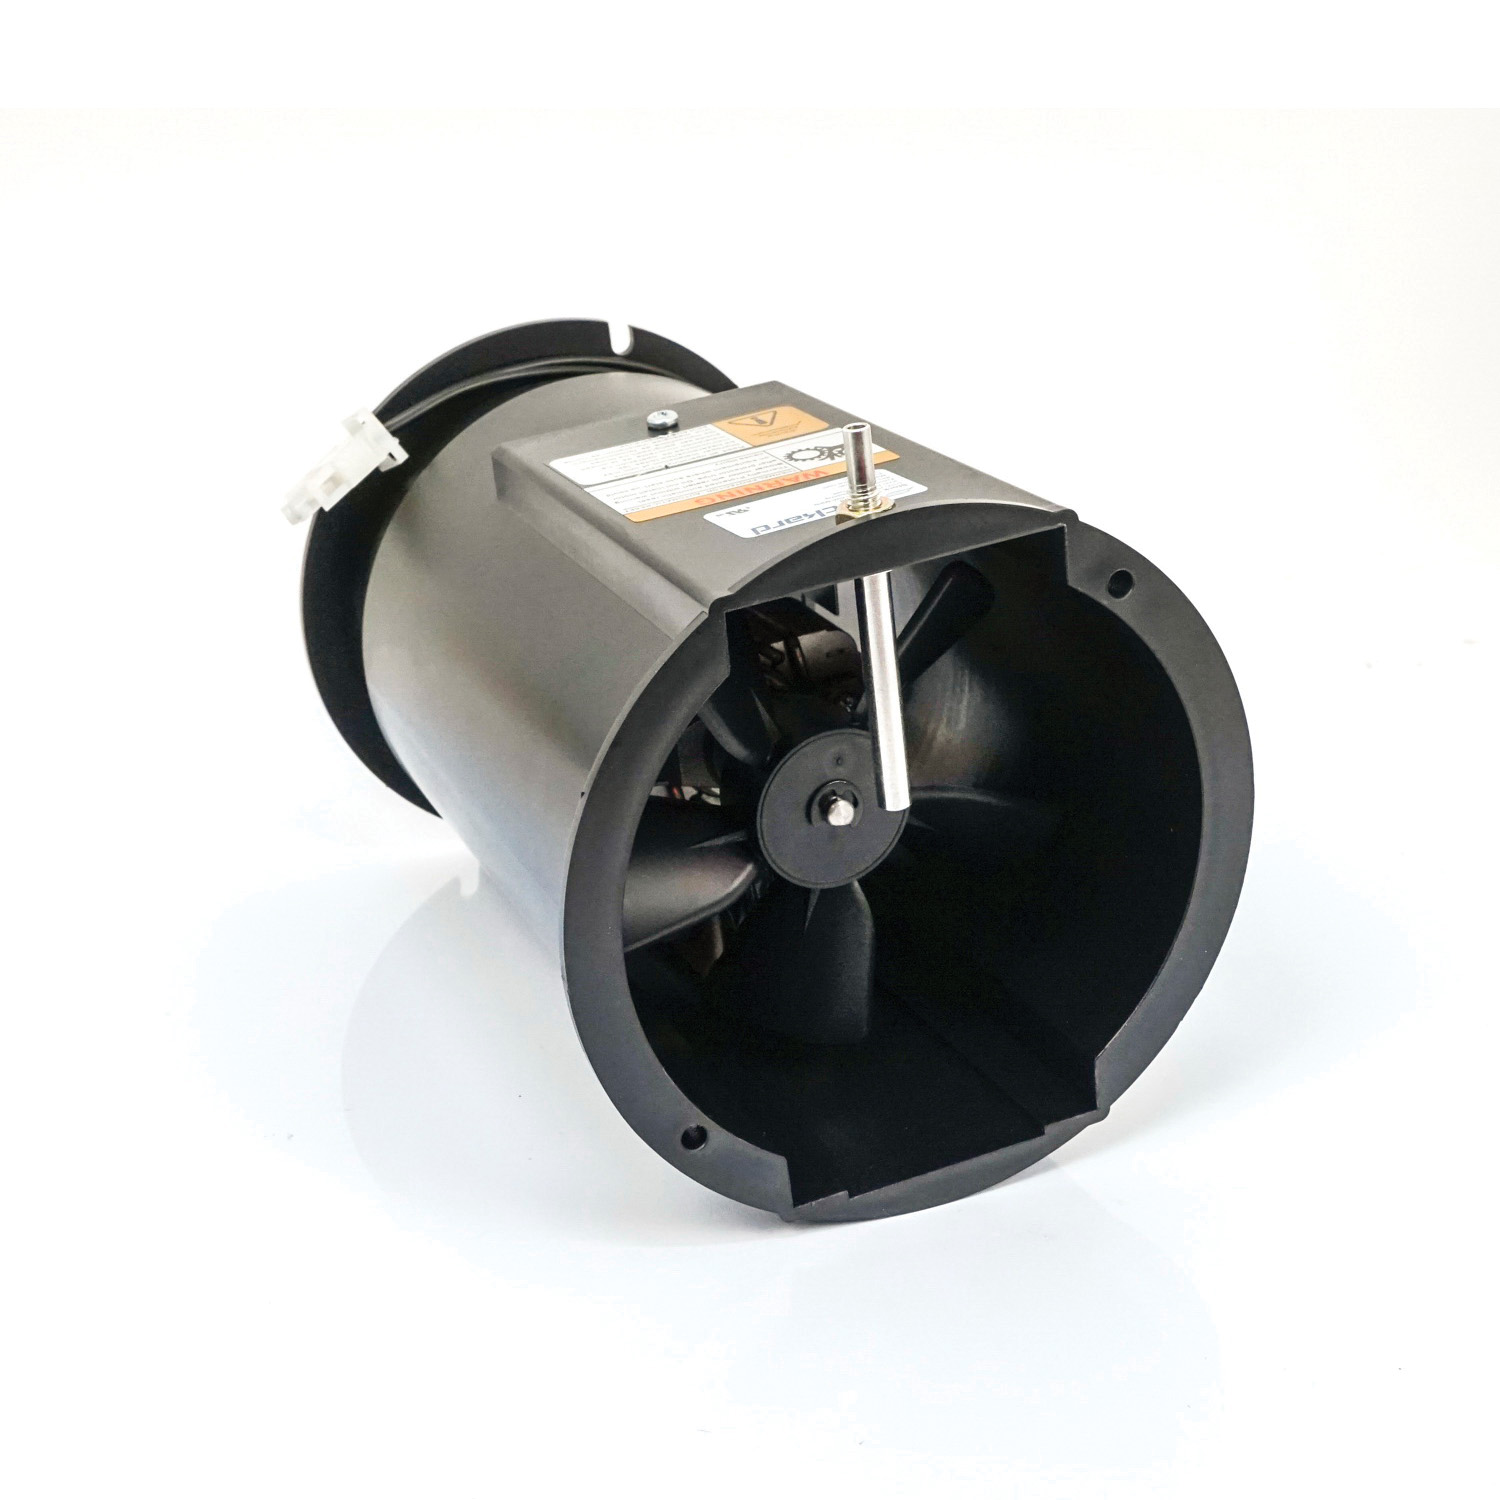 Packard 65404 Shaded Pole Inducer Motor, 1/100 hp, 115/120 V, 60 Hz, 1 ph, C Frame, 3000 rpm Speed